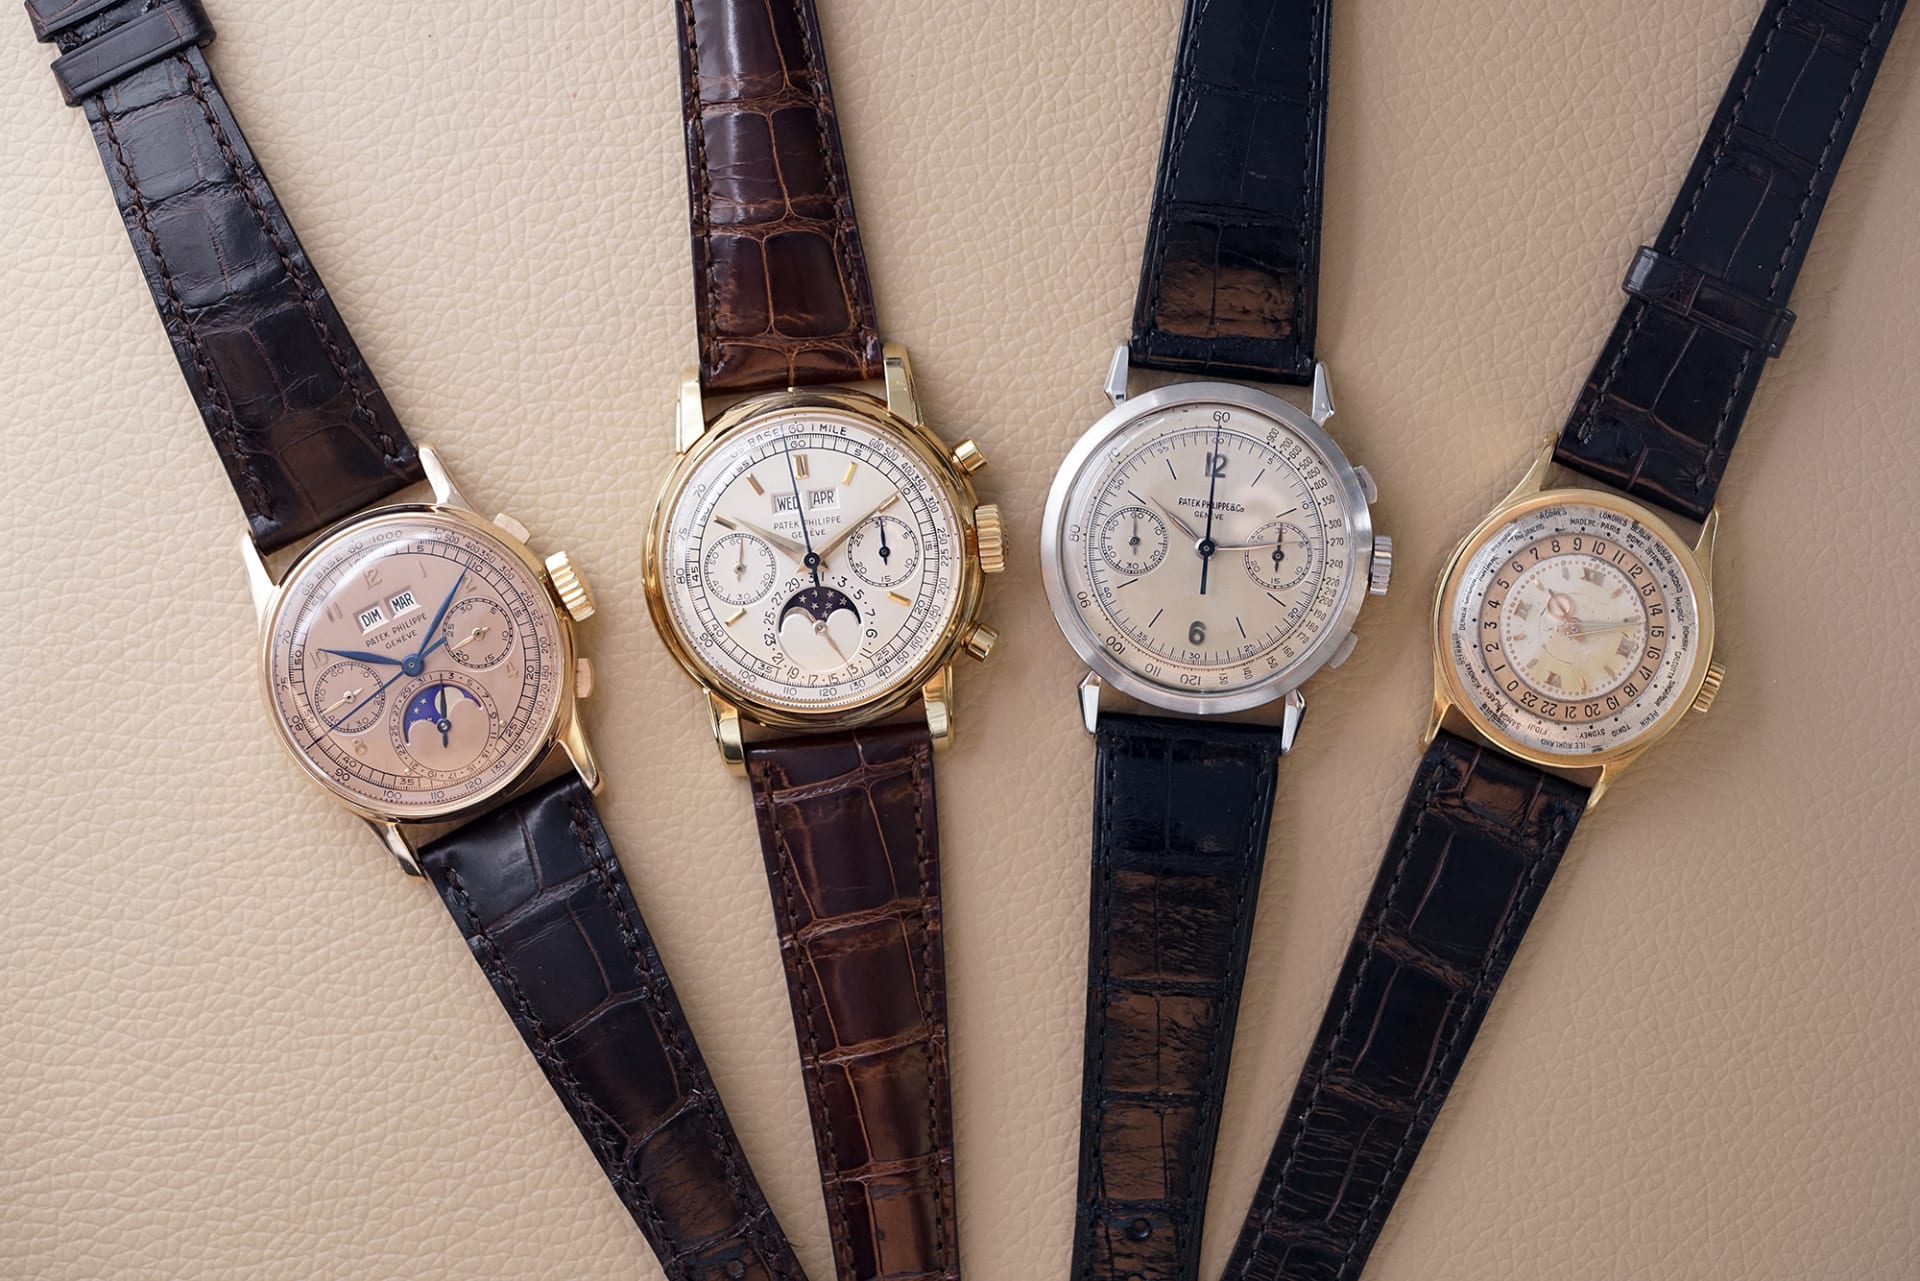 A must-see: Jean-Claude Biver's private watch collection presented